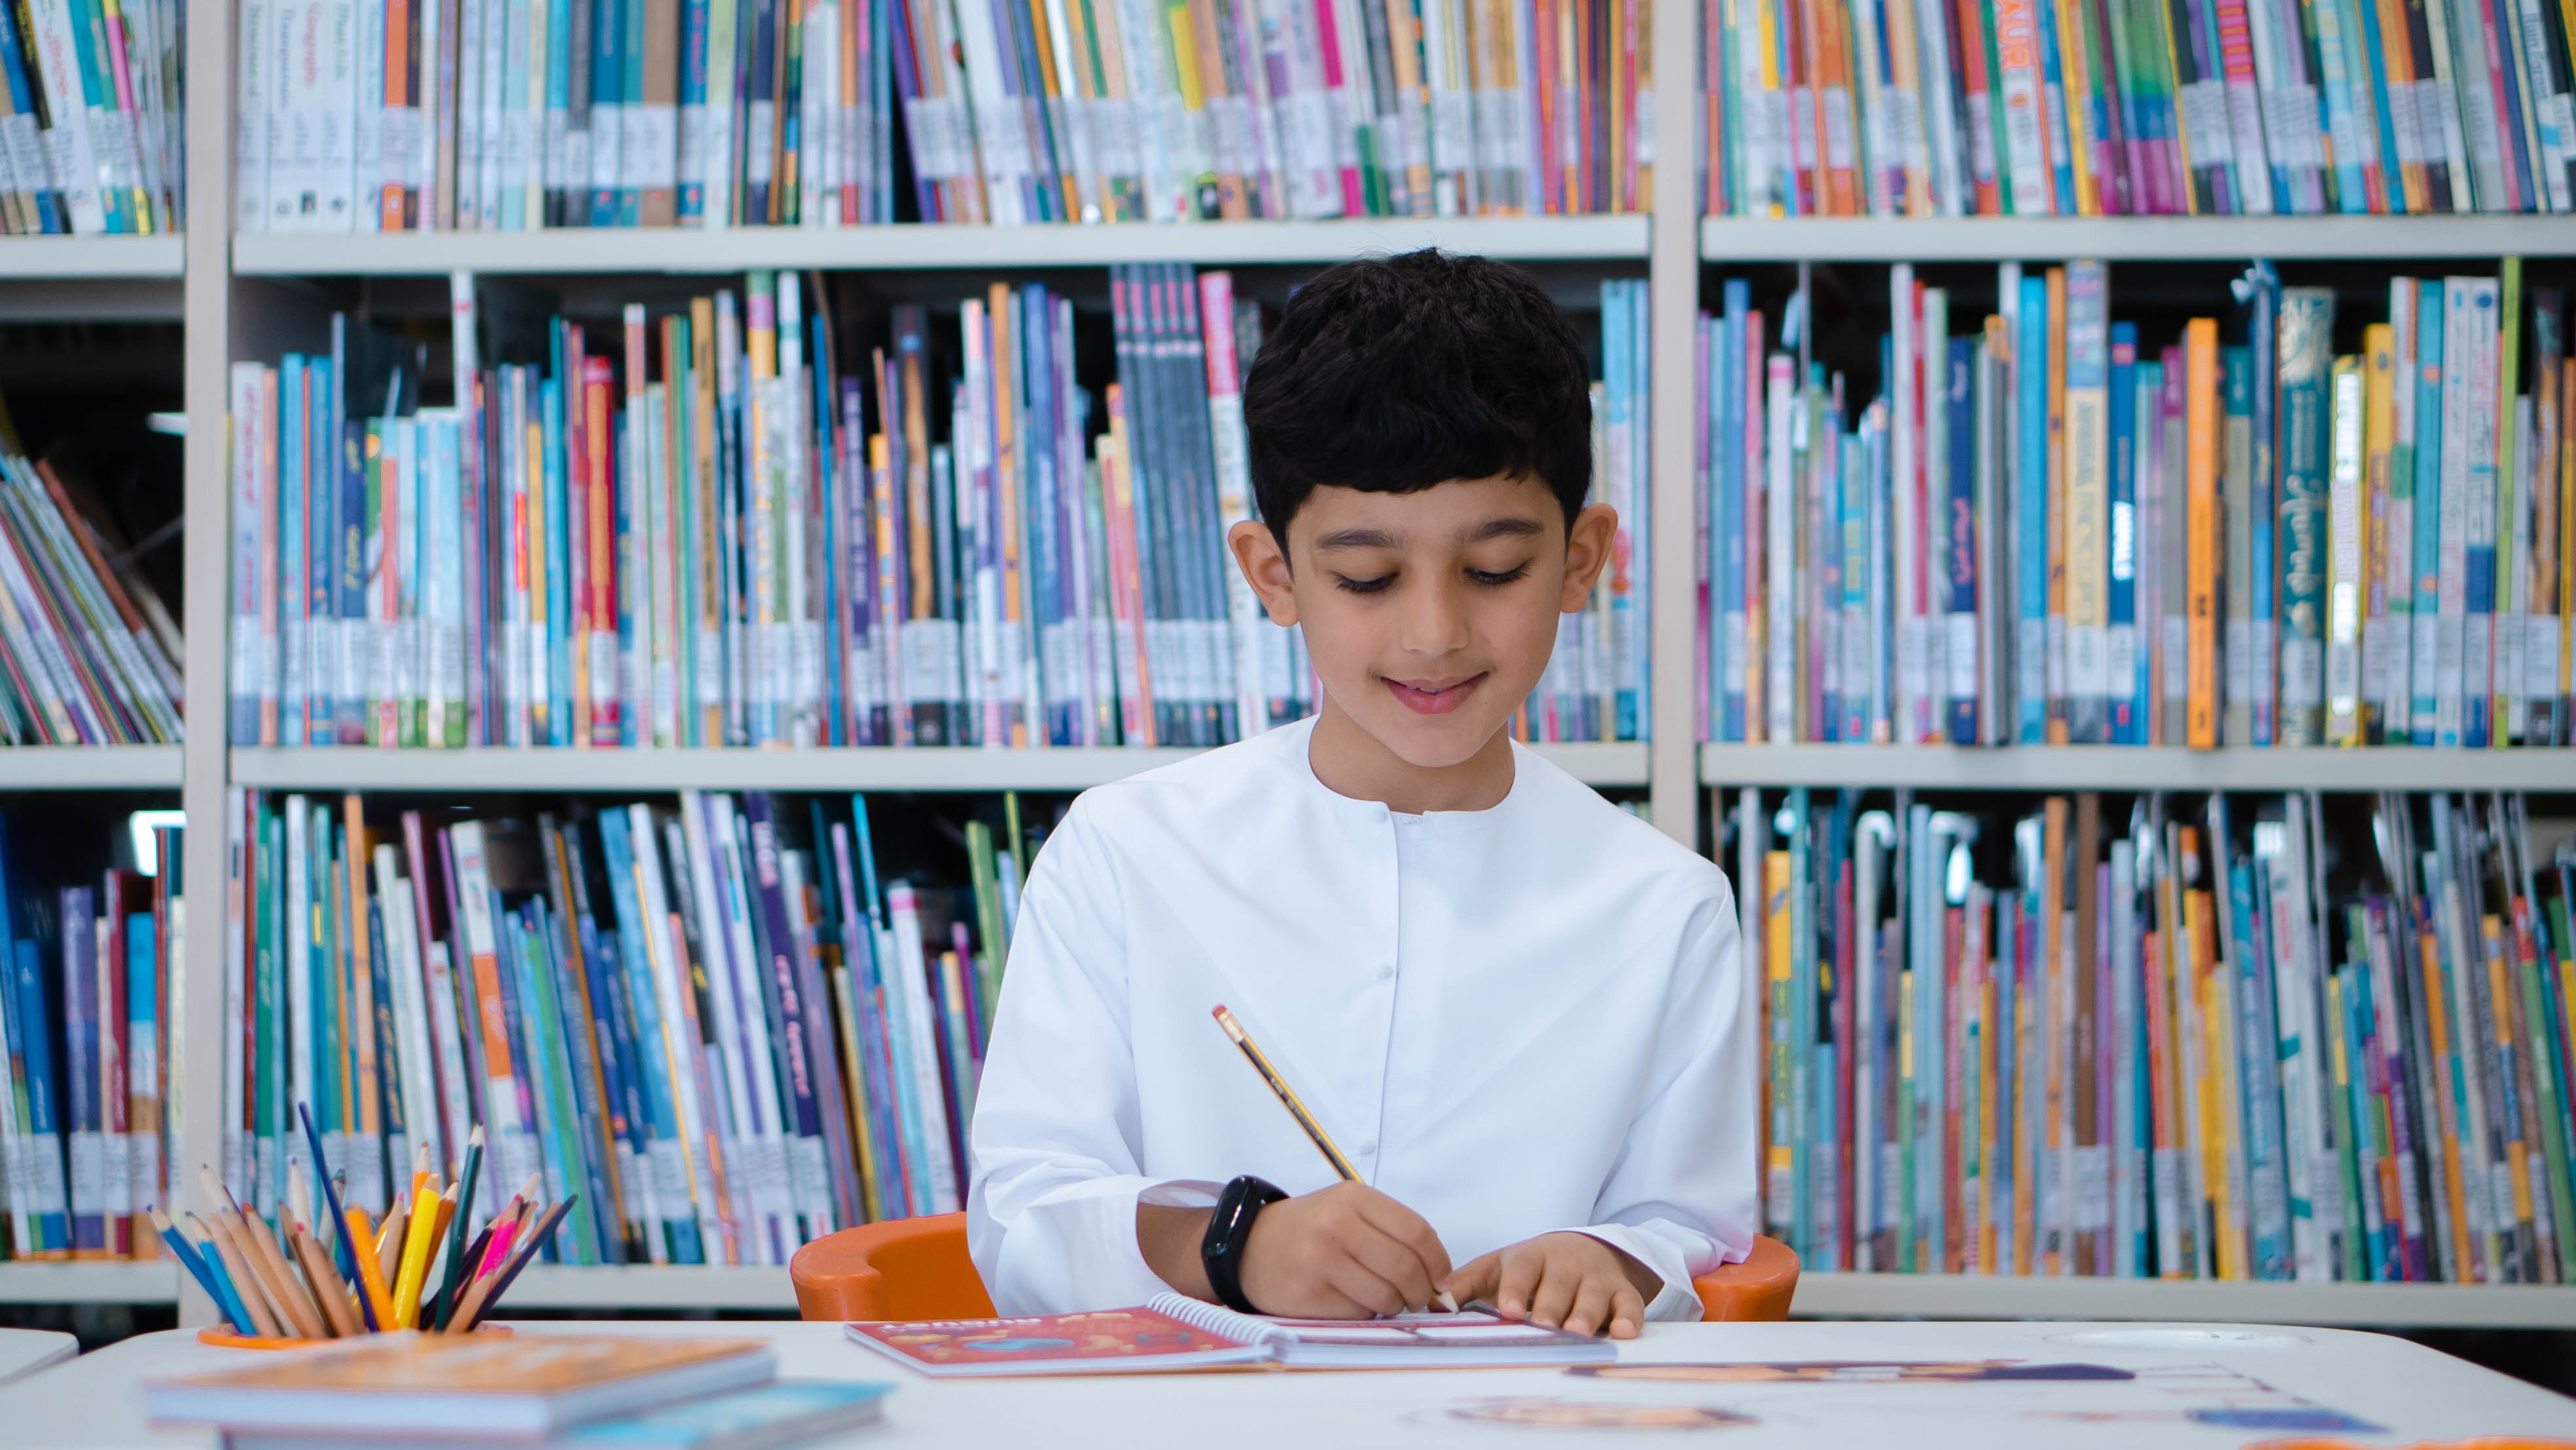 MAKTABA At The Department Of Culture And Tourism – Abu Dhabi To Host More Than 150 Workshops And Events For Children And Adults In Celebration Of The UAE’s Month Of Reading